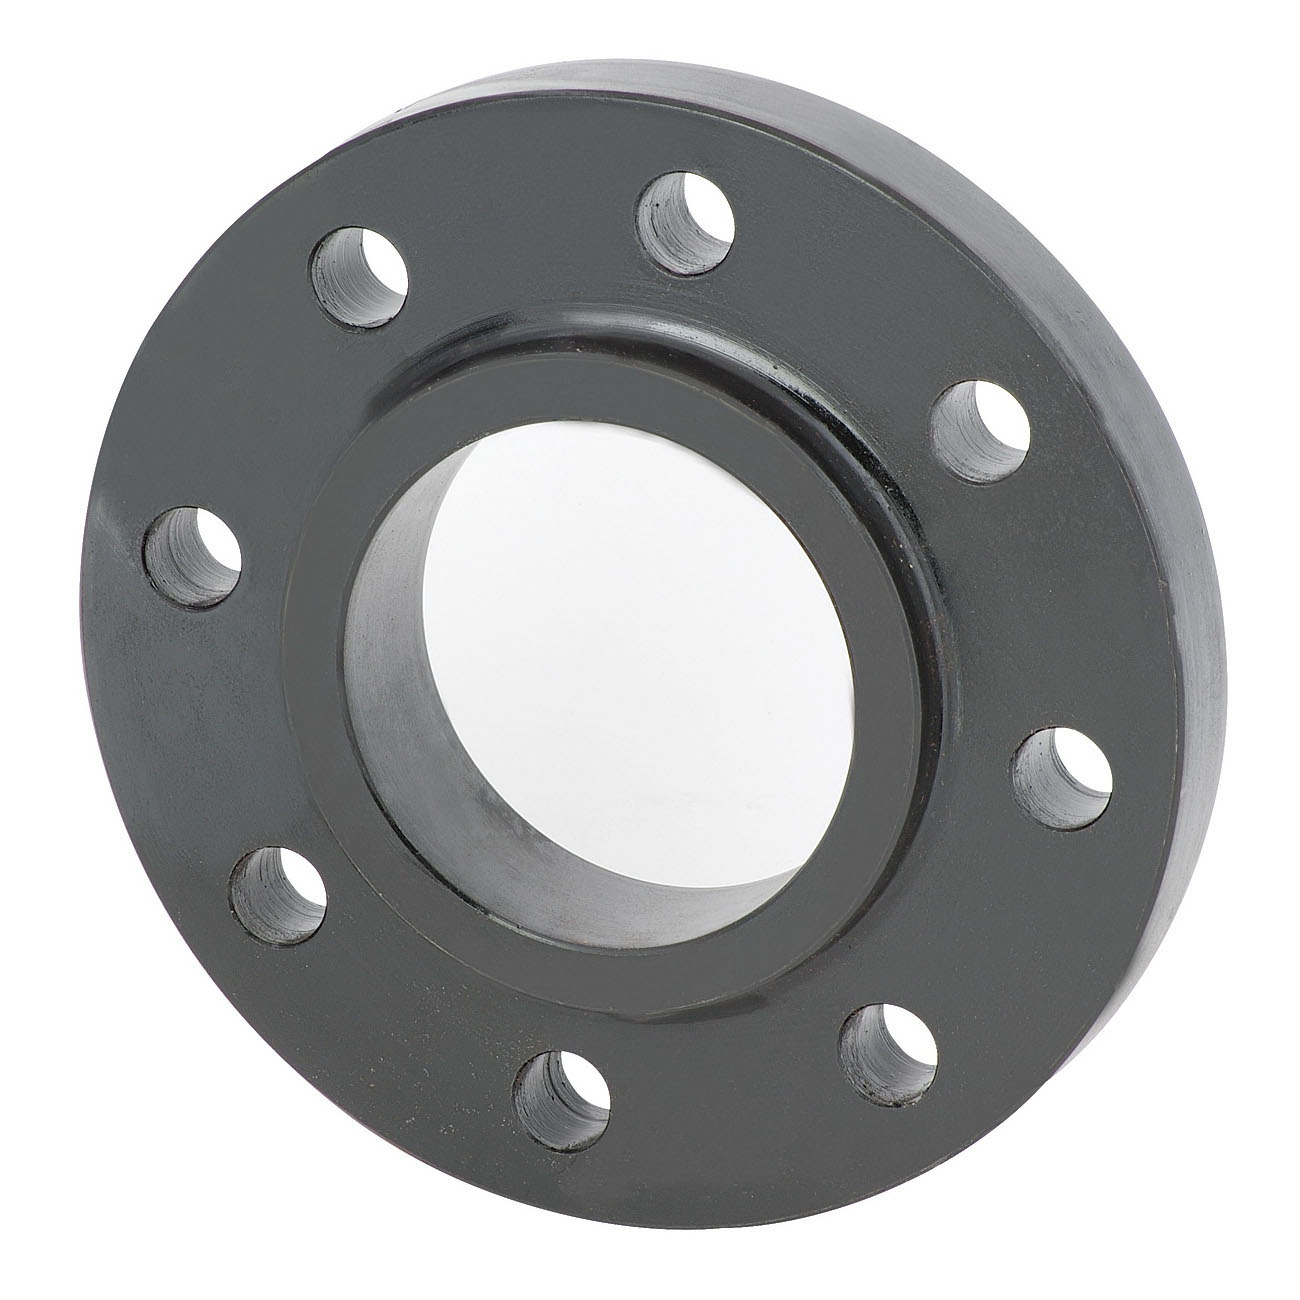 Matco-Norca&trade; MN300SF11 Raised Face Slip-On Flange, 4 in, Carbon Steel, 300 lb